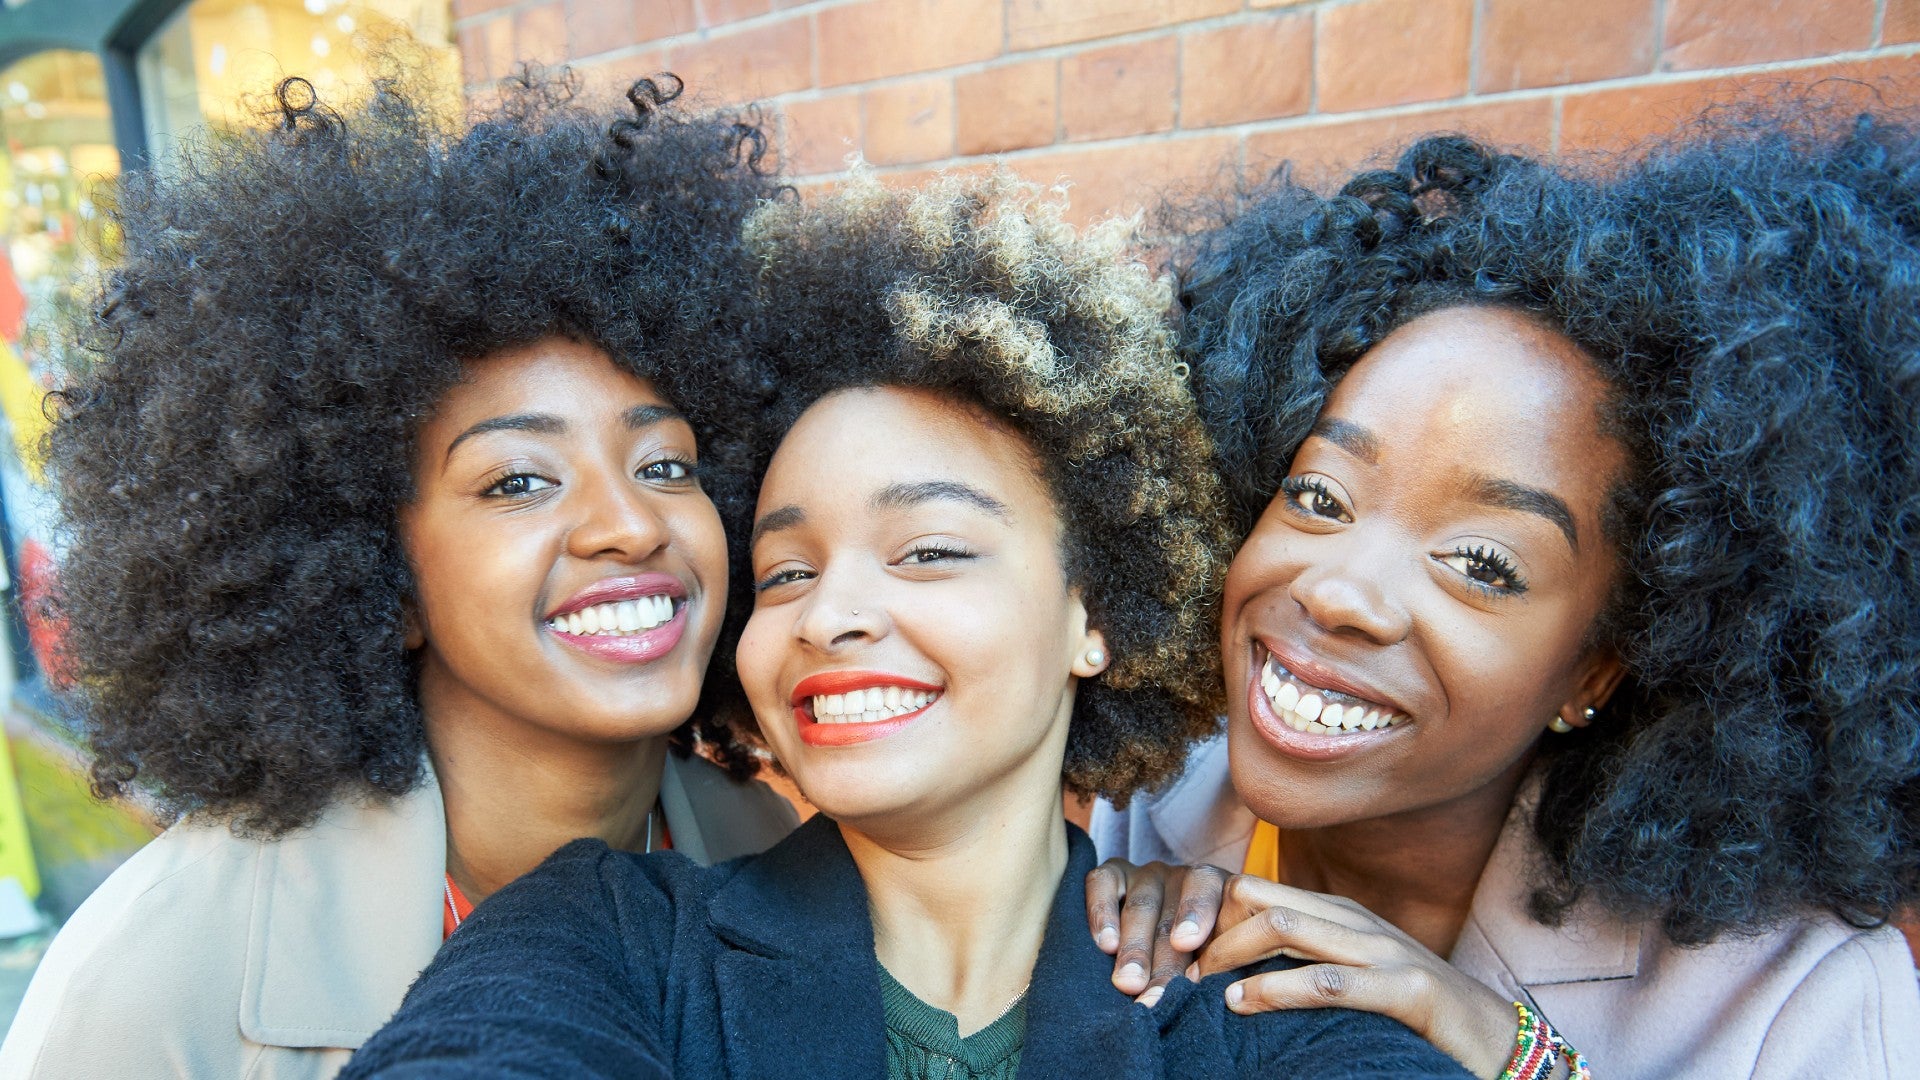 BROWN GIRL Jane Teams Up With SheaMoisture To Help Black Women-Owned Businesses